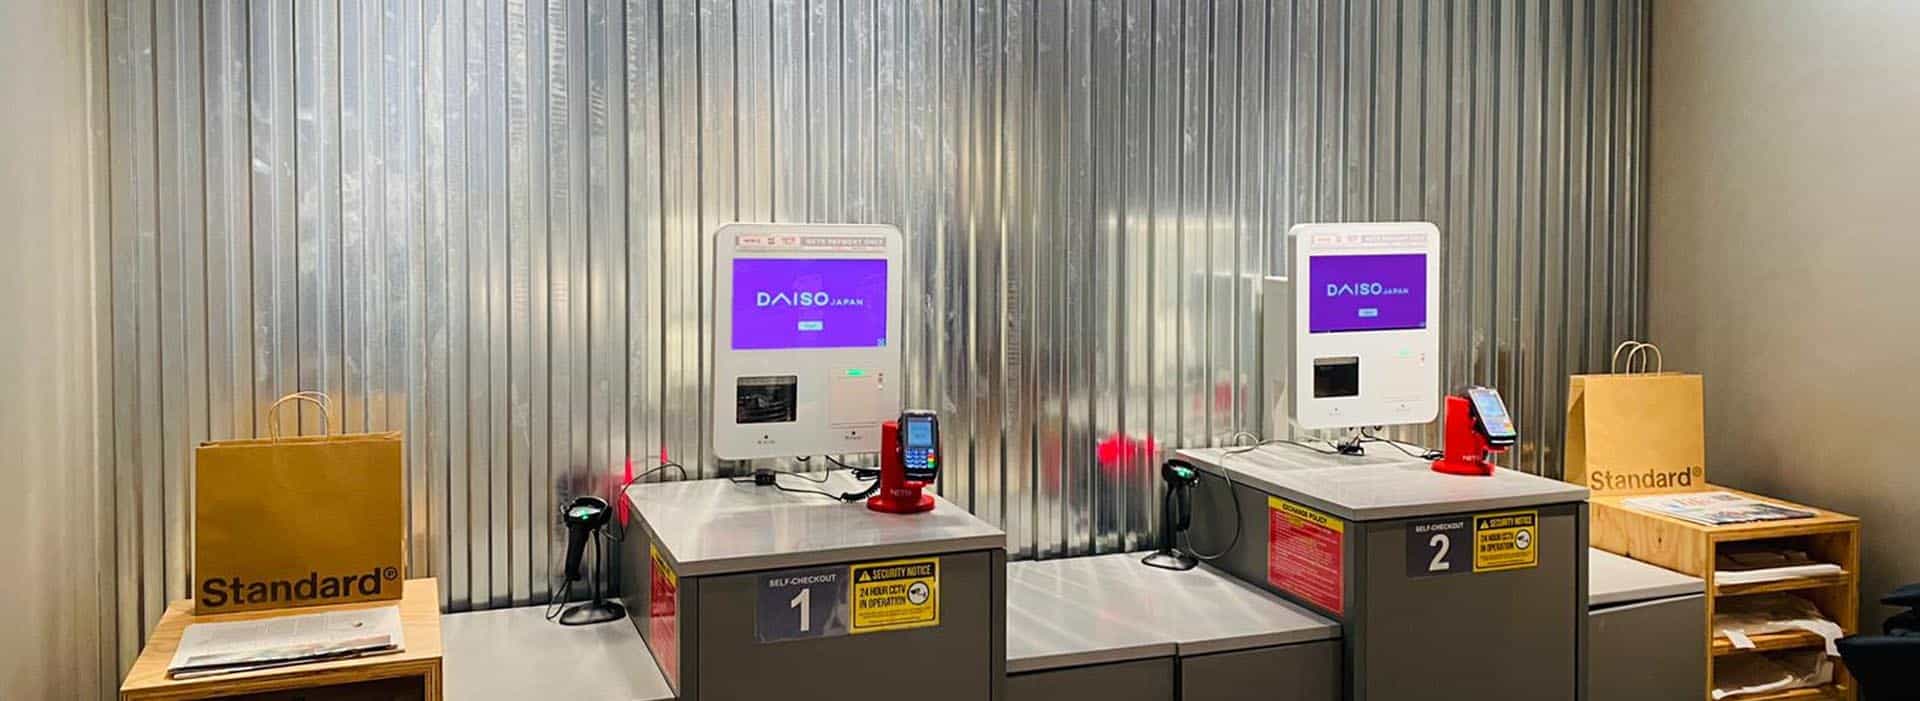 Transforming customers shopping experience with Edgeworks self-checkout kiosk, as used by one of the customer, Daiso Singapore.